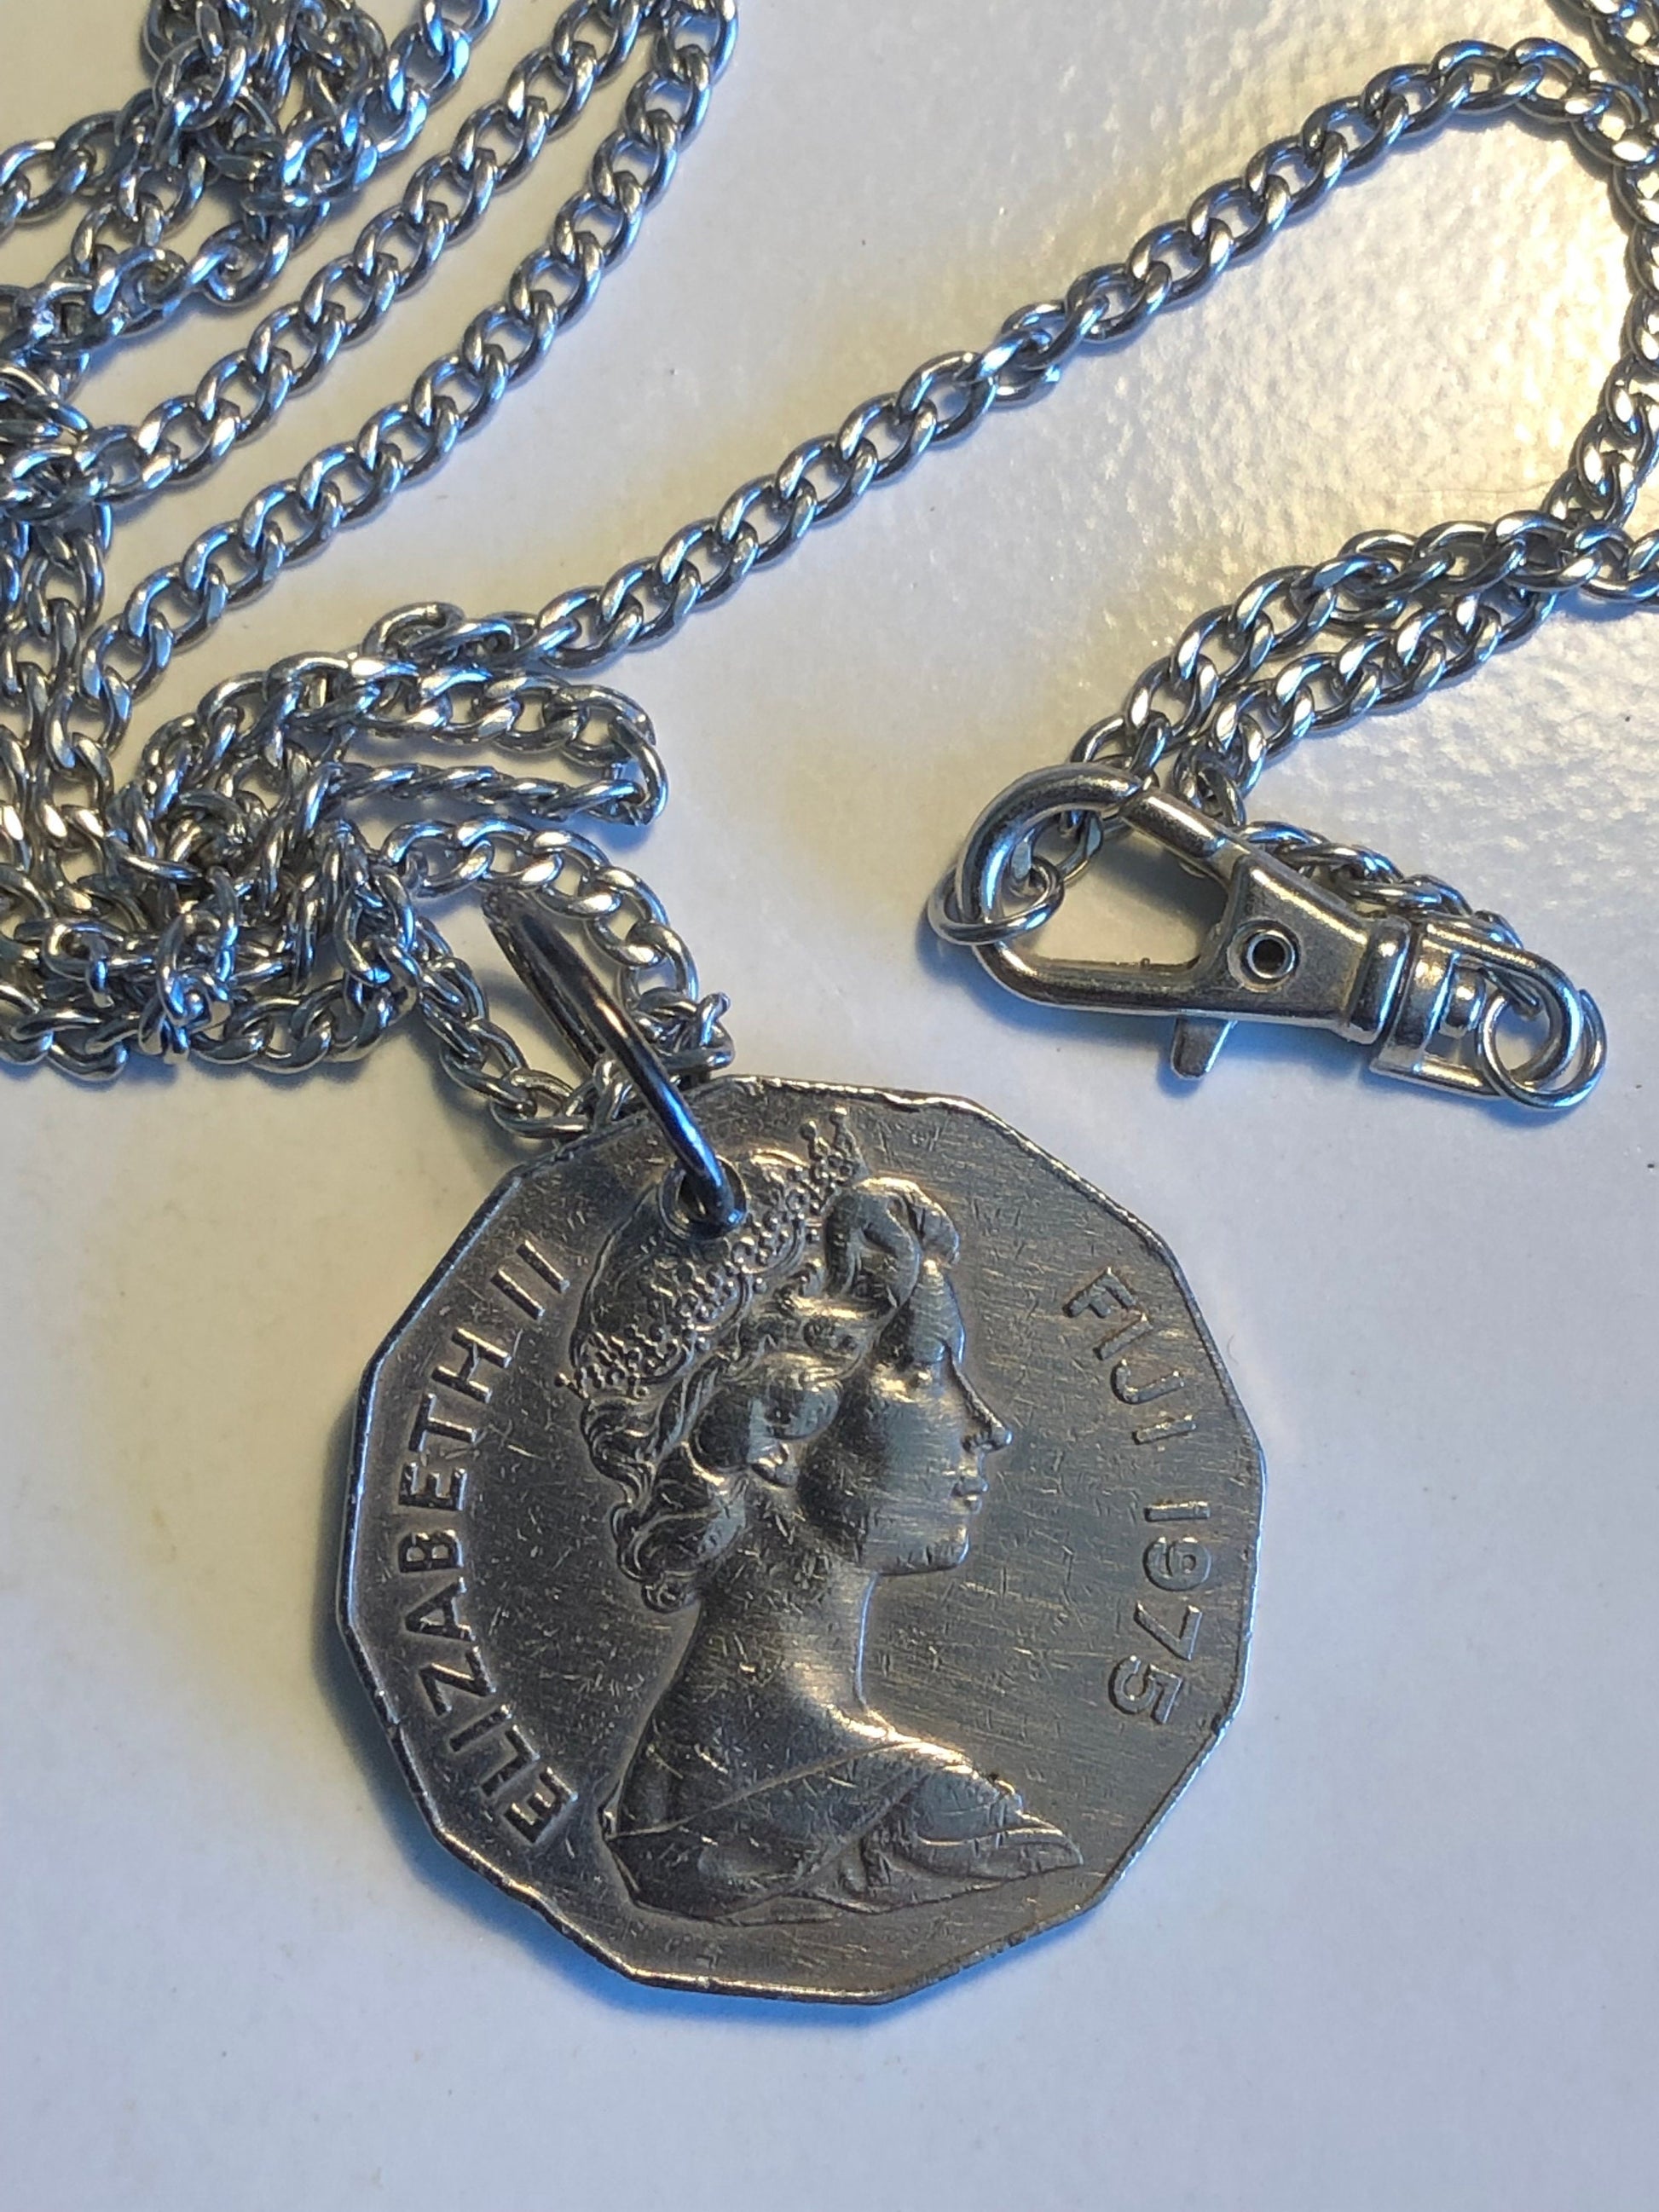 Fiji Necklace Coin Chain 50 Cent Piece Fijian Personal Vintage Handmade Jewelry Gift Friend Charm For Him Her World Coin Collector